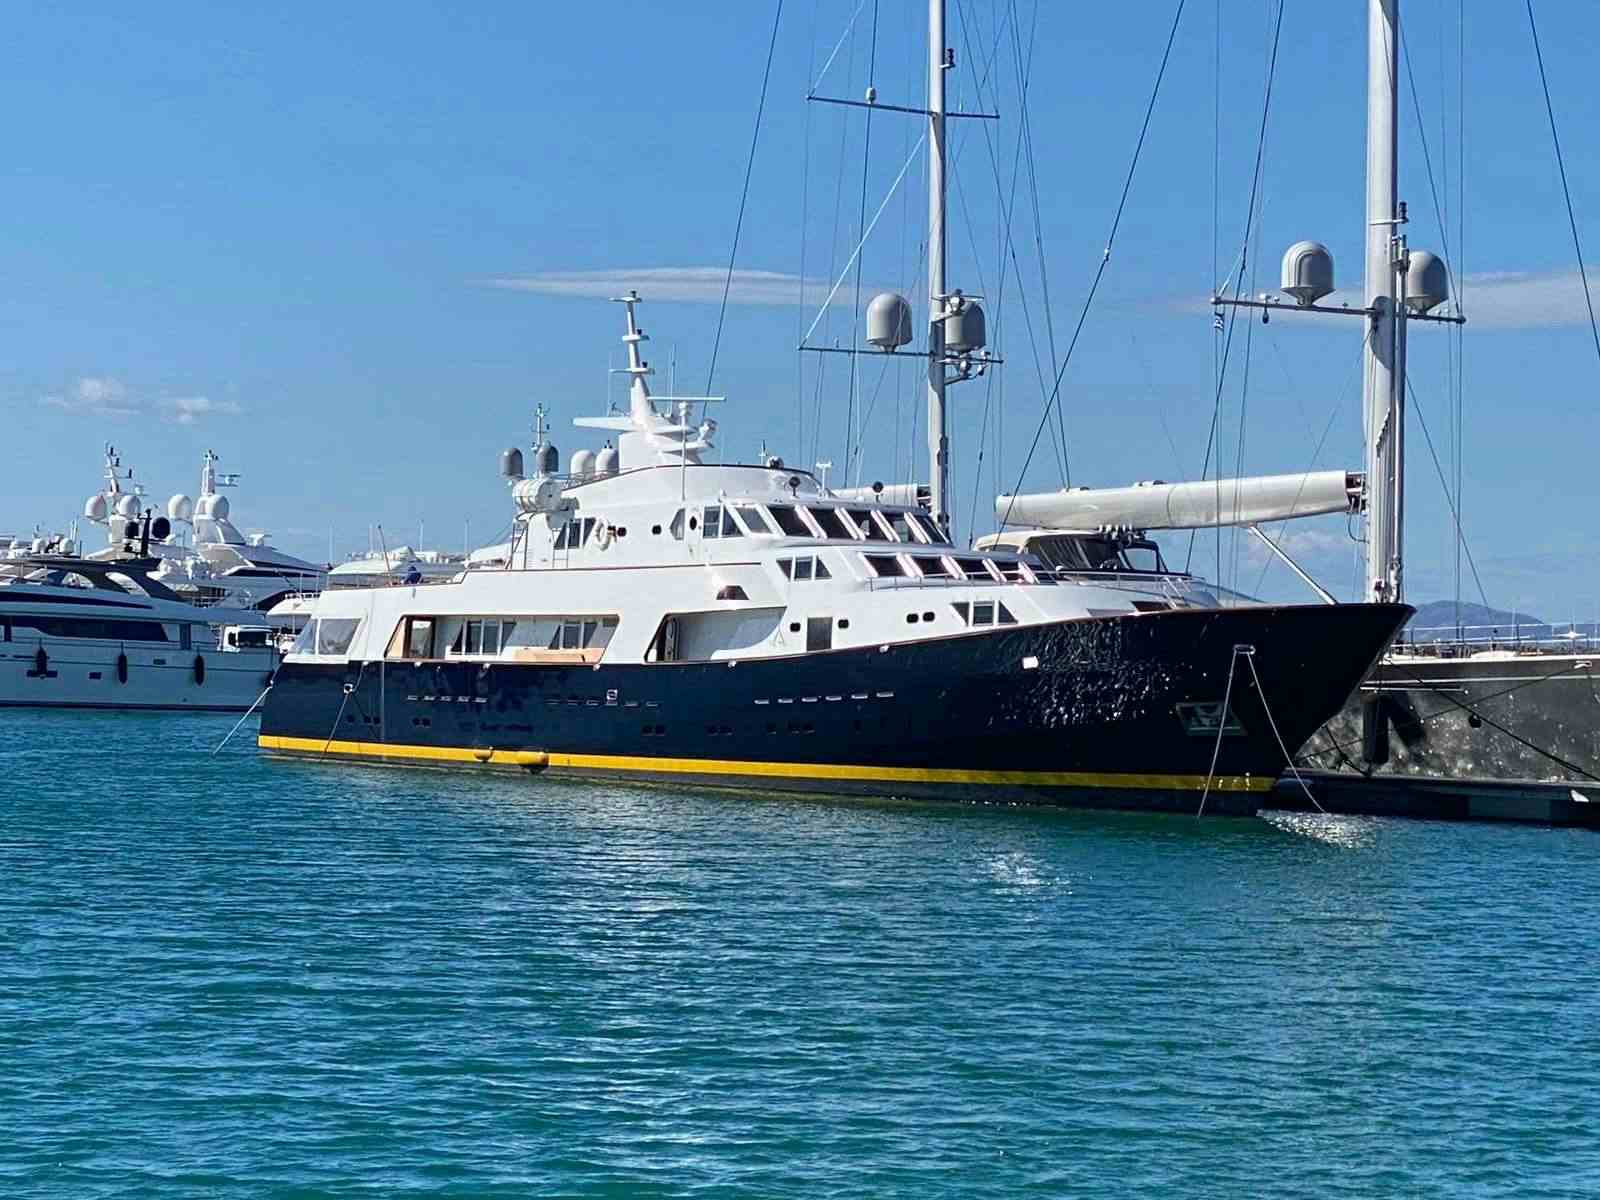 SOMETHING COOL - Yacht Charter Koh Samui & Boat hire in Summer: W. Med -Naples/Sicily, Greece, W. Med -Riviera/Cors/Sard., Turkey, W. Med - Spain/Balearics, Croatia | Winter: Indian Ocean and SE Asia, Red Sea, United Arab Emirates 1